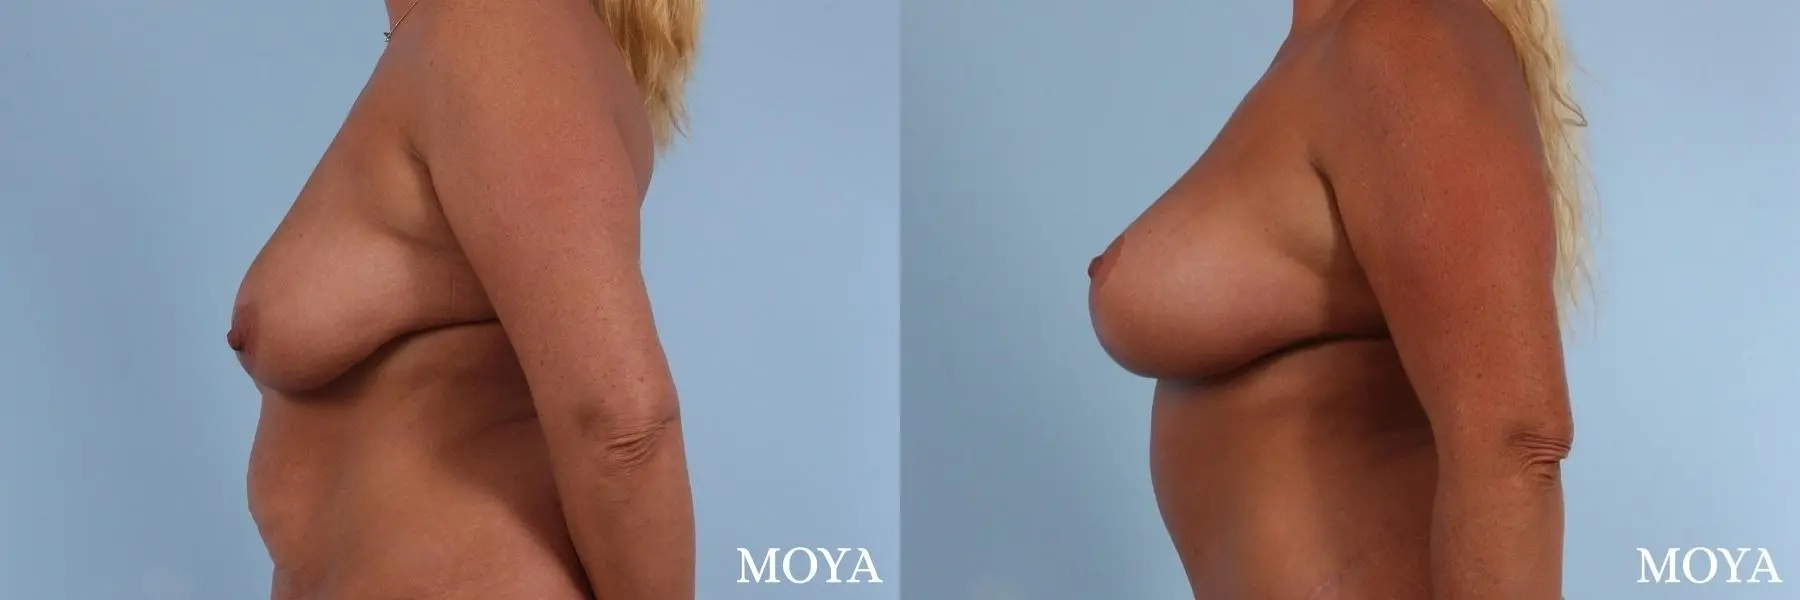 Breast Augmentation With Lift: Patient 8 - Before and After 2